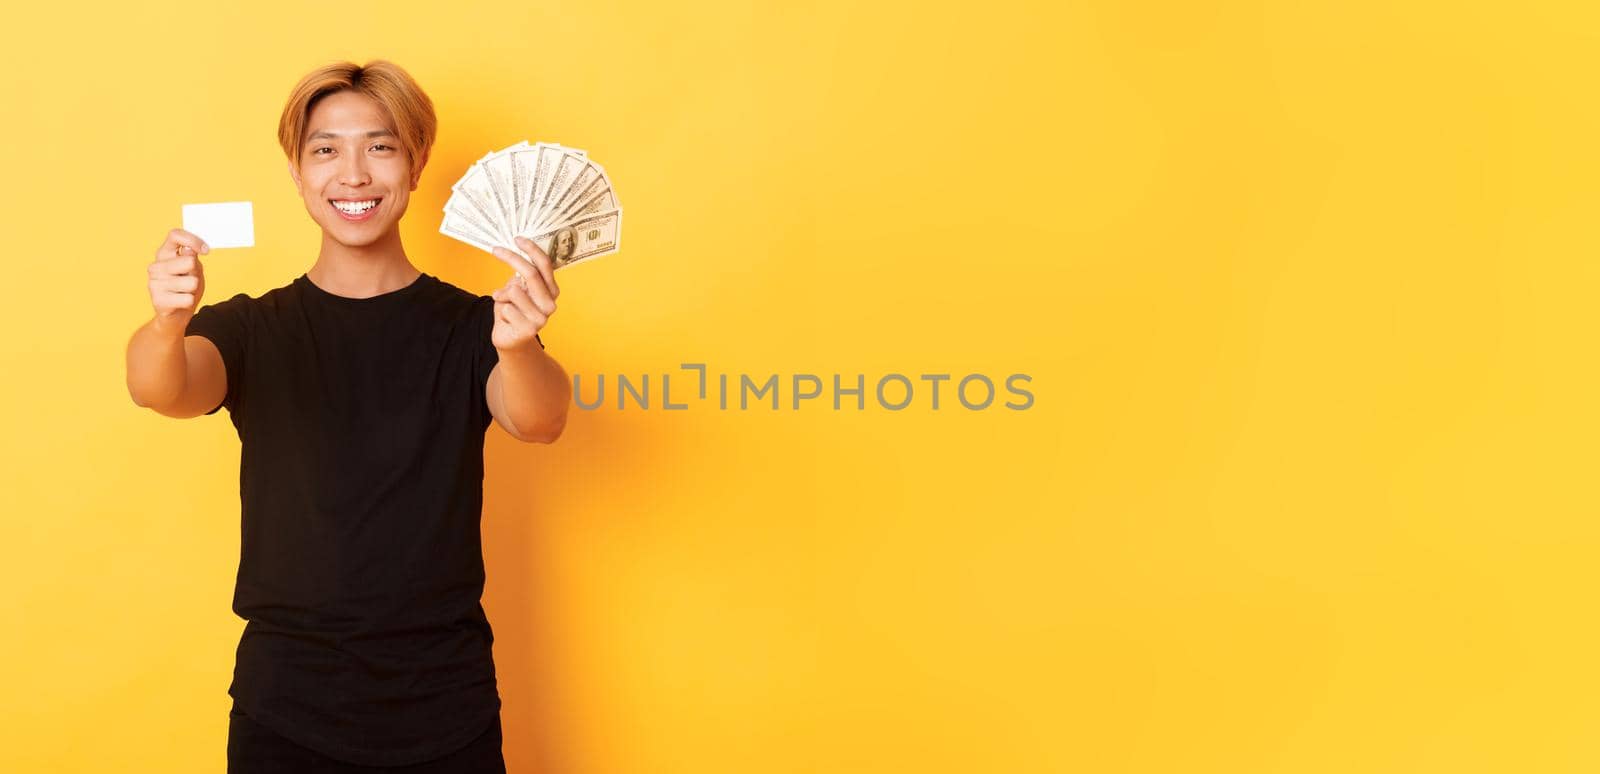 Satisfied attractive korean guy with blond hair, showing money and credit card, smiling happy, yellow background.